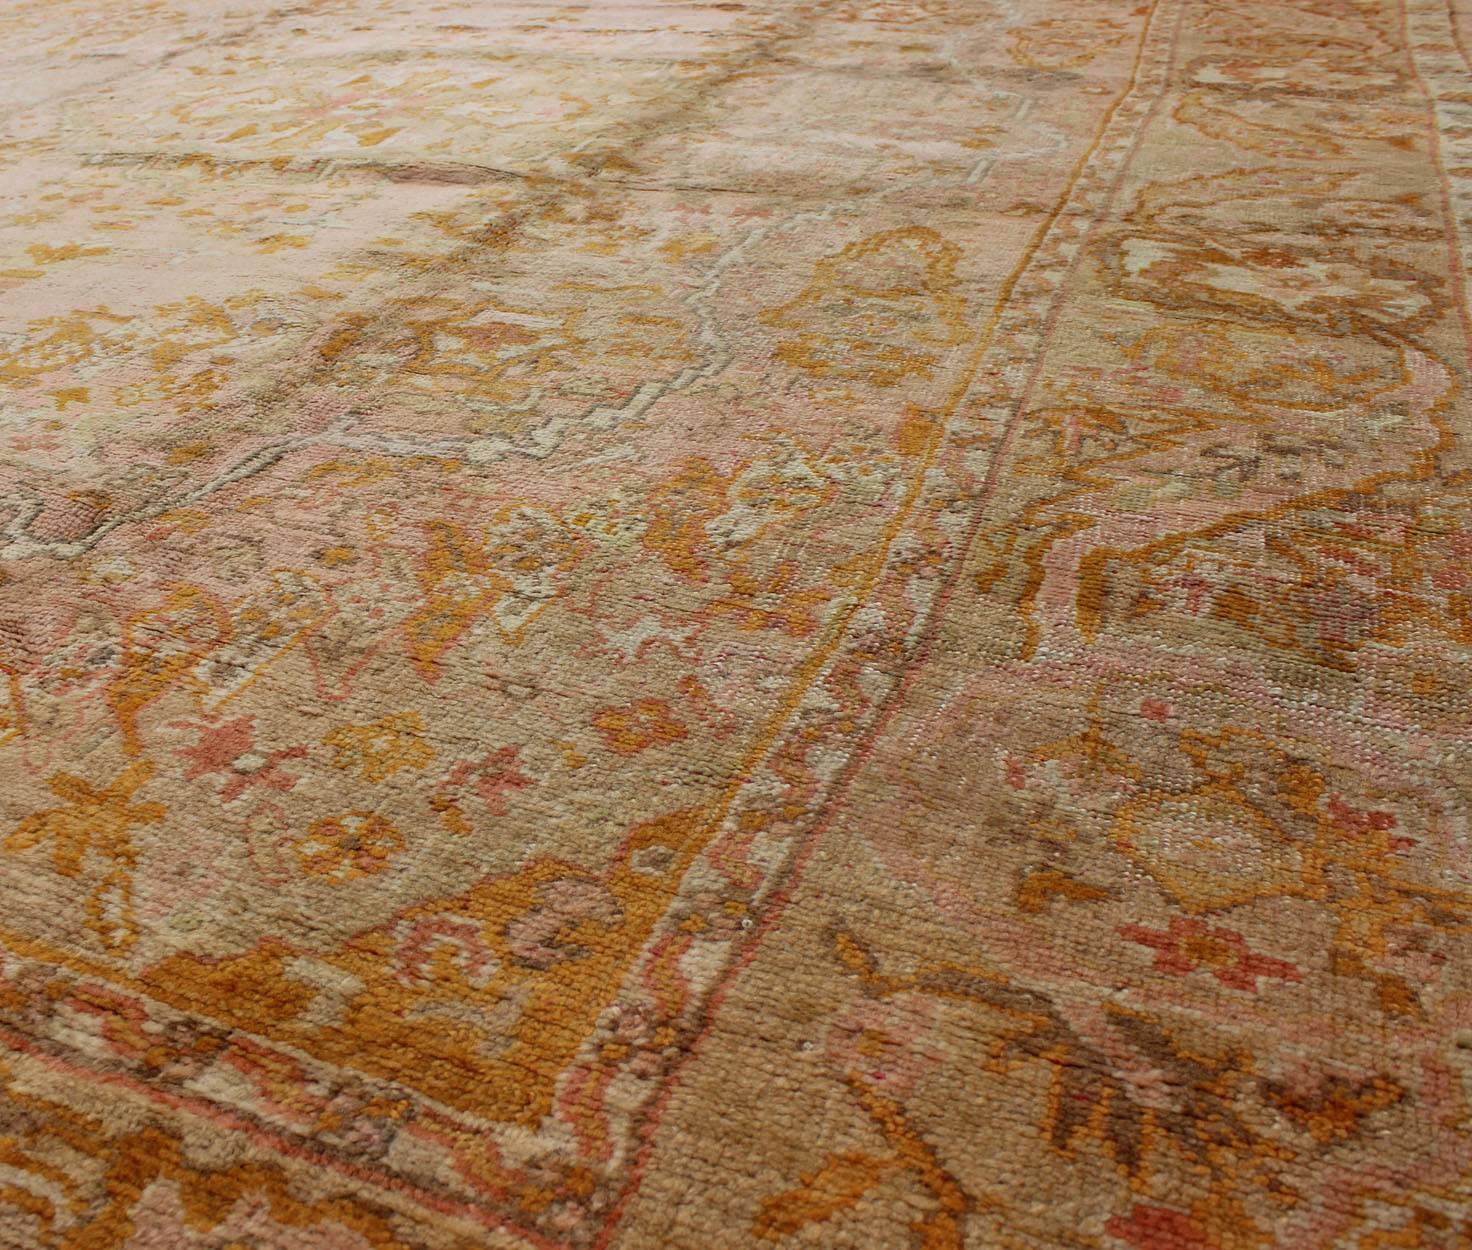 Antique Oushak Rug with Floral Pattern in Pink, Orange and Light Green  In Excellent Condition For Sale In Atlanta, GA